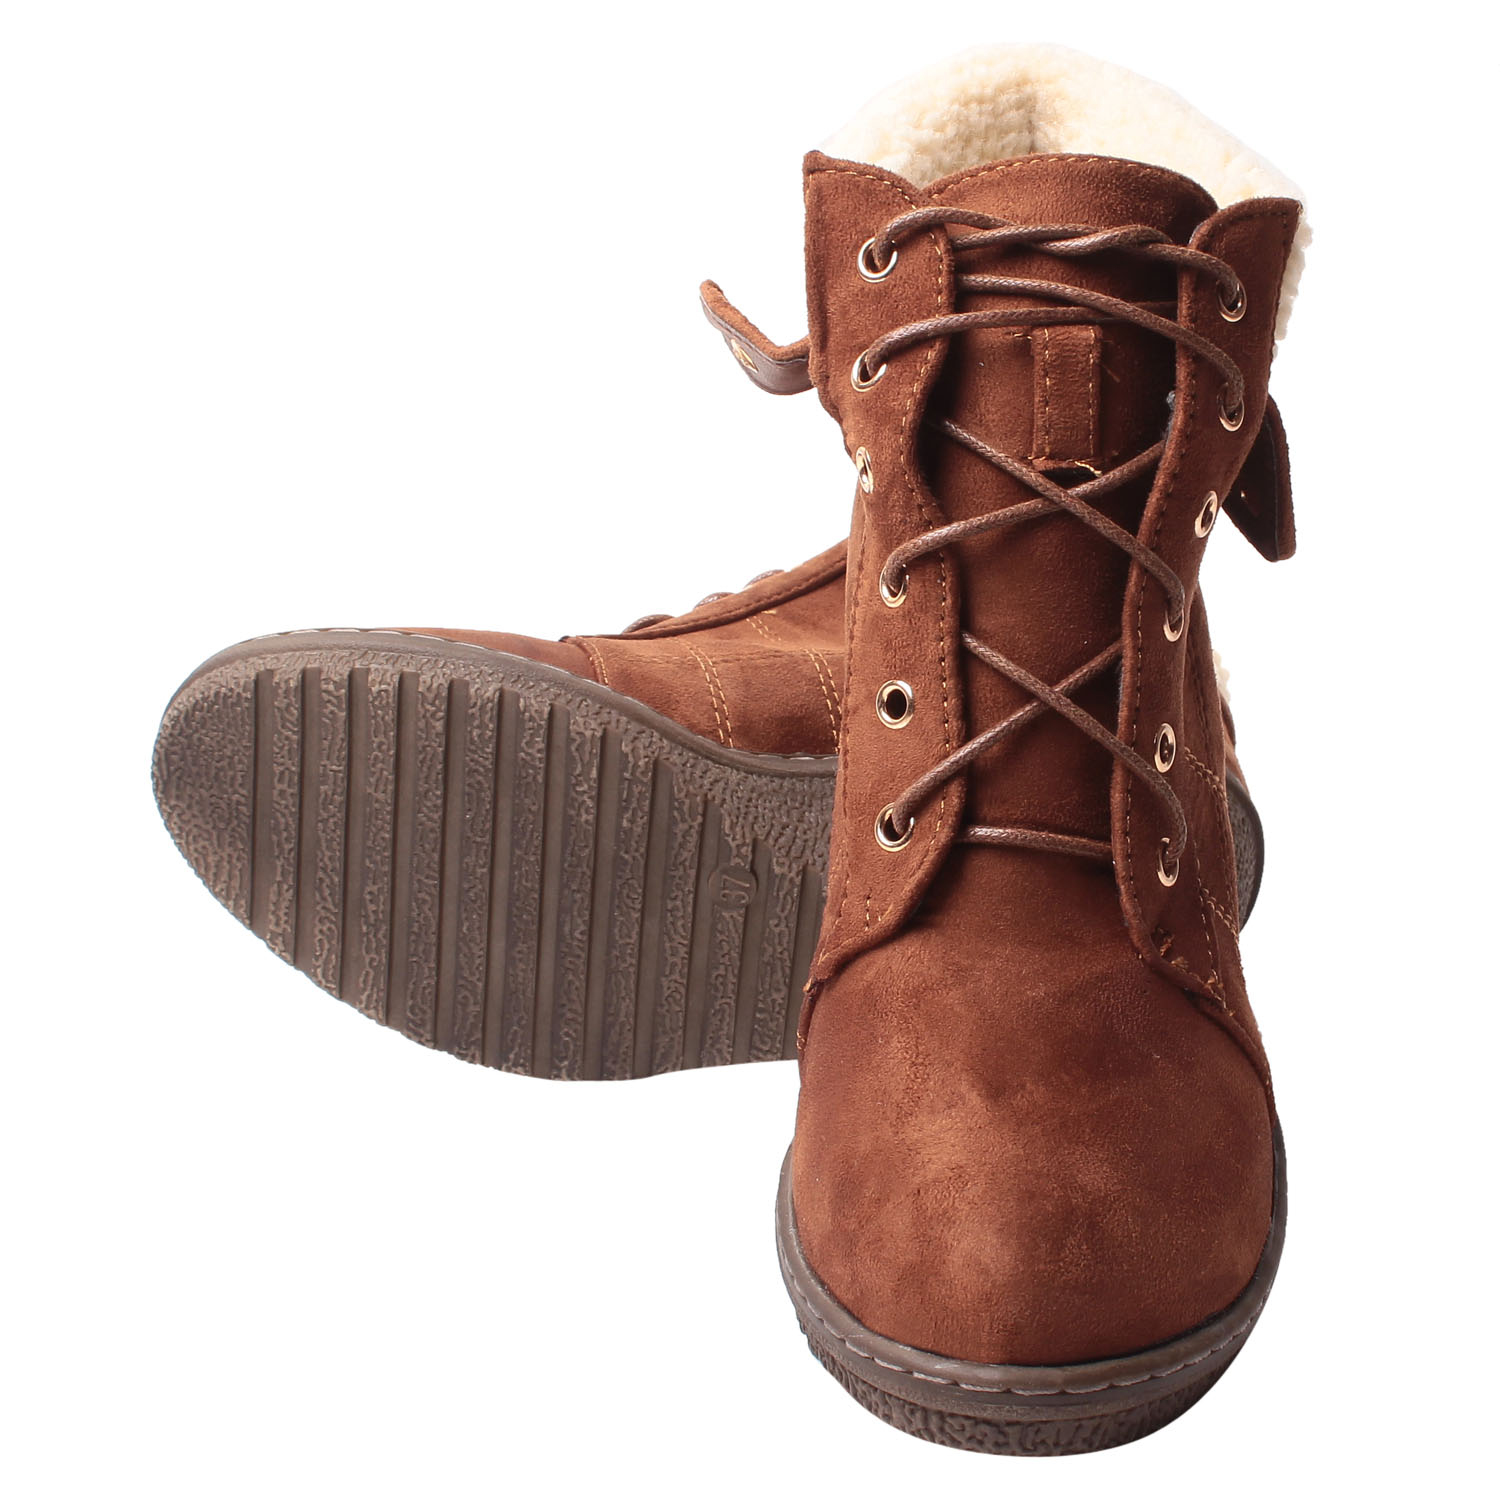 Buy MSC ANKLE LENGTH SUEDE BROWN BOOTS (MSC-RR78-3655-3-BROWN BOOTS ...